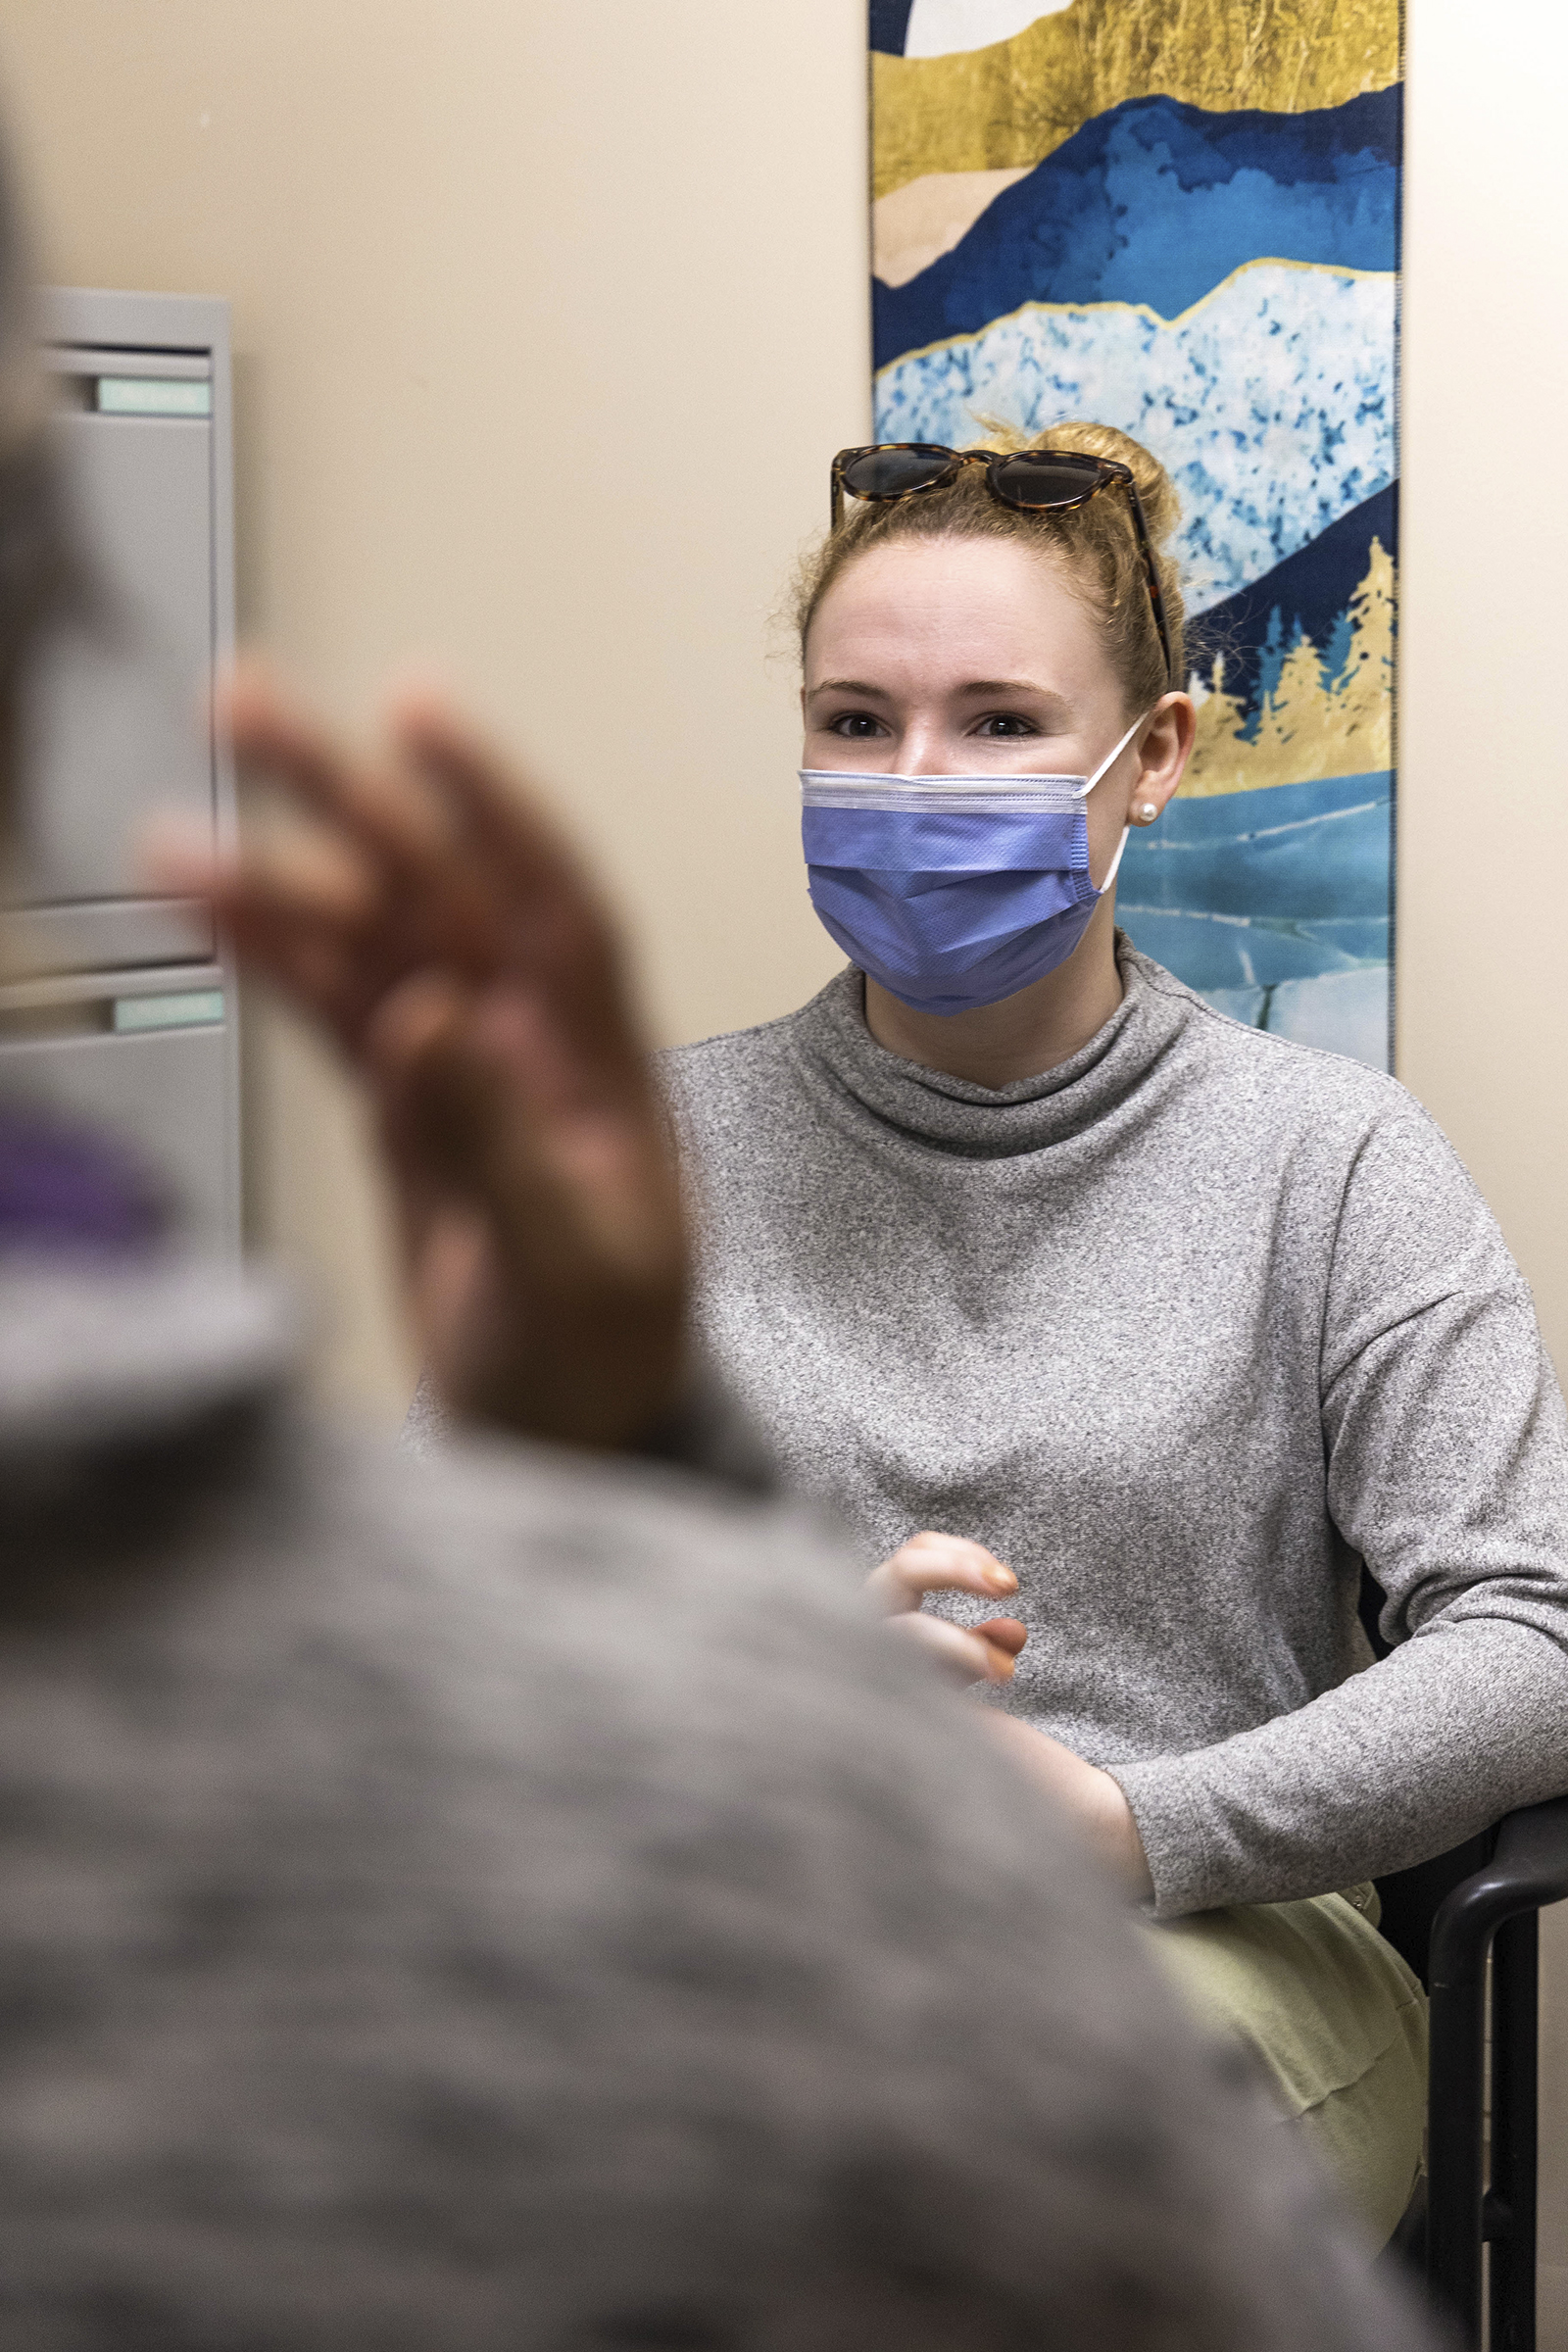 A woman, Laura, with a face mask on in her therapist's office, talking emotionally to her therapist. Laura is in focus and is shown over her therapist's blurred shoulder.